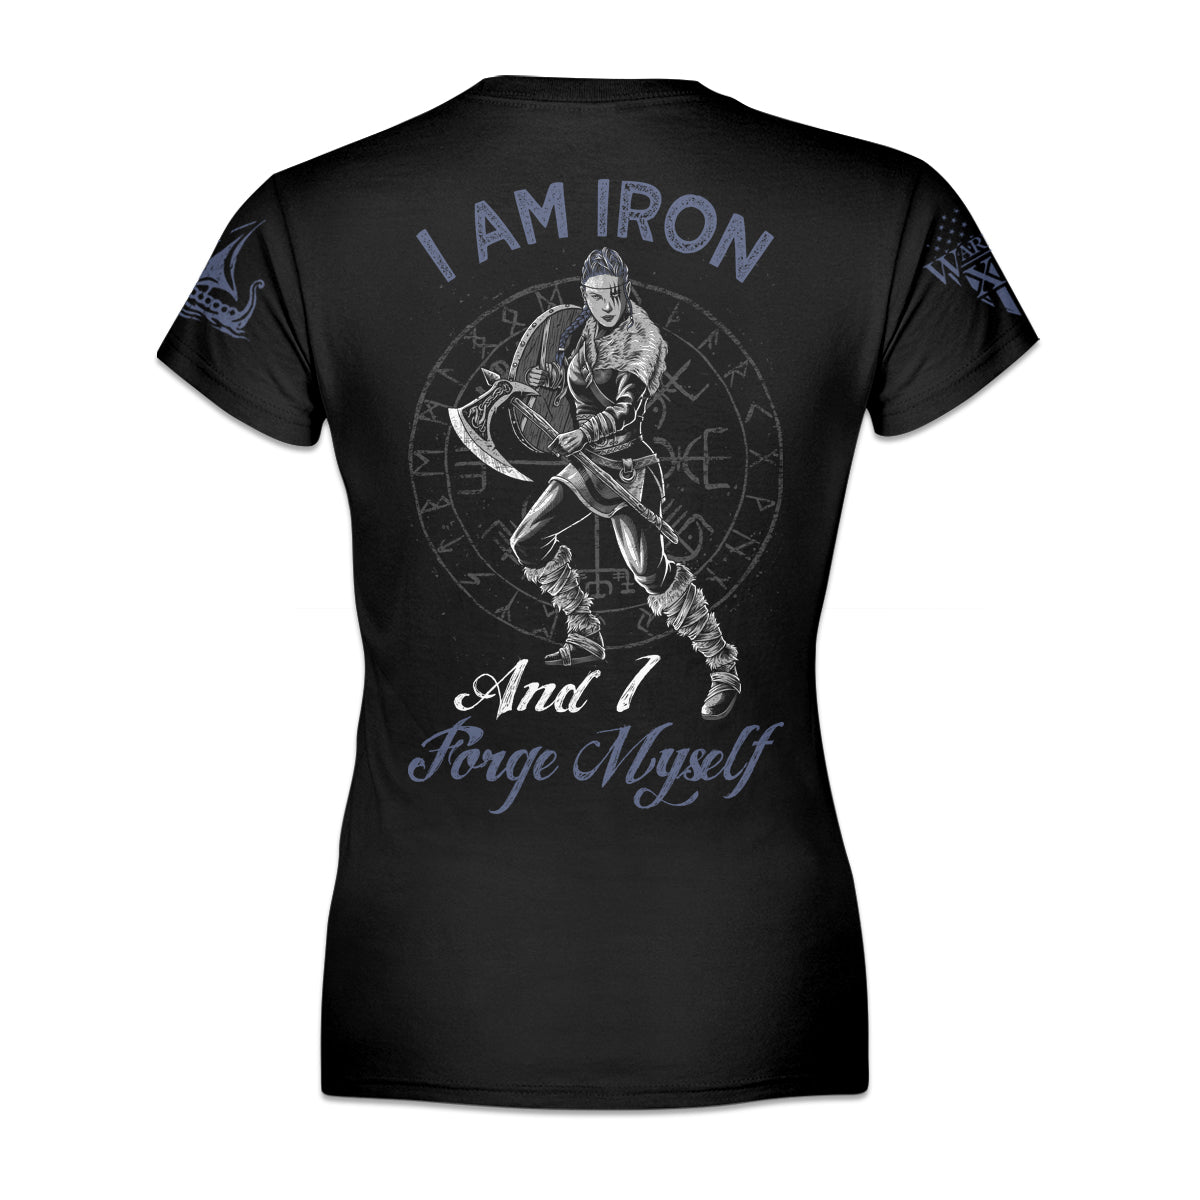 A black women's relaxed fit shirt with the words "I am iron, and I forge myself" with a female warrior printed on the back of the shirt.